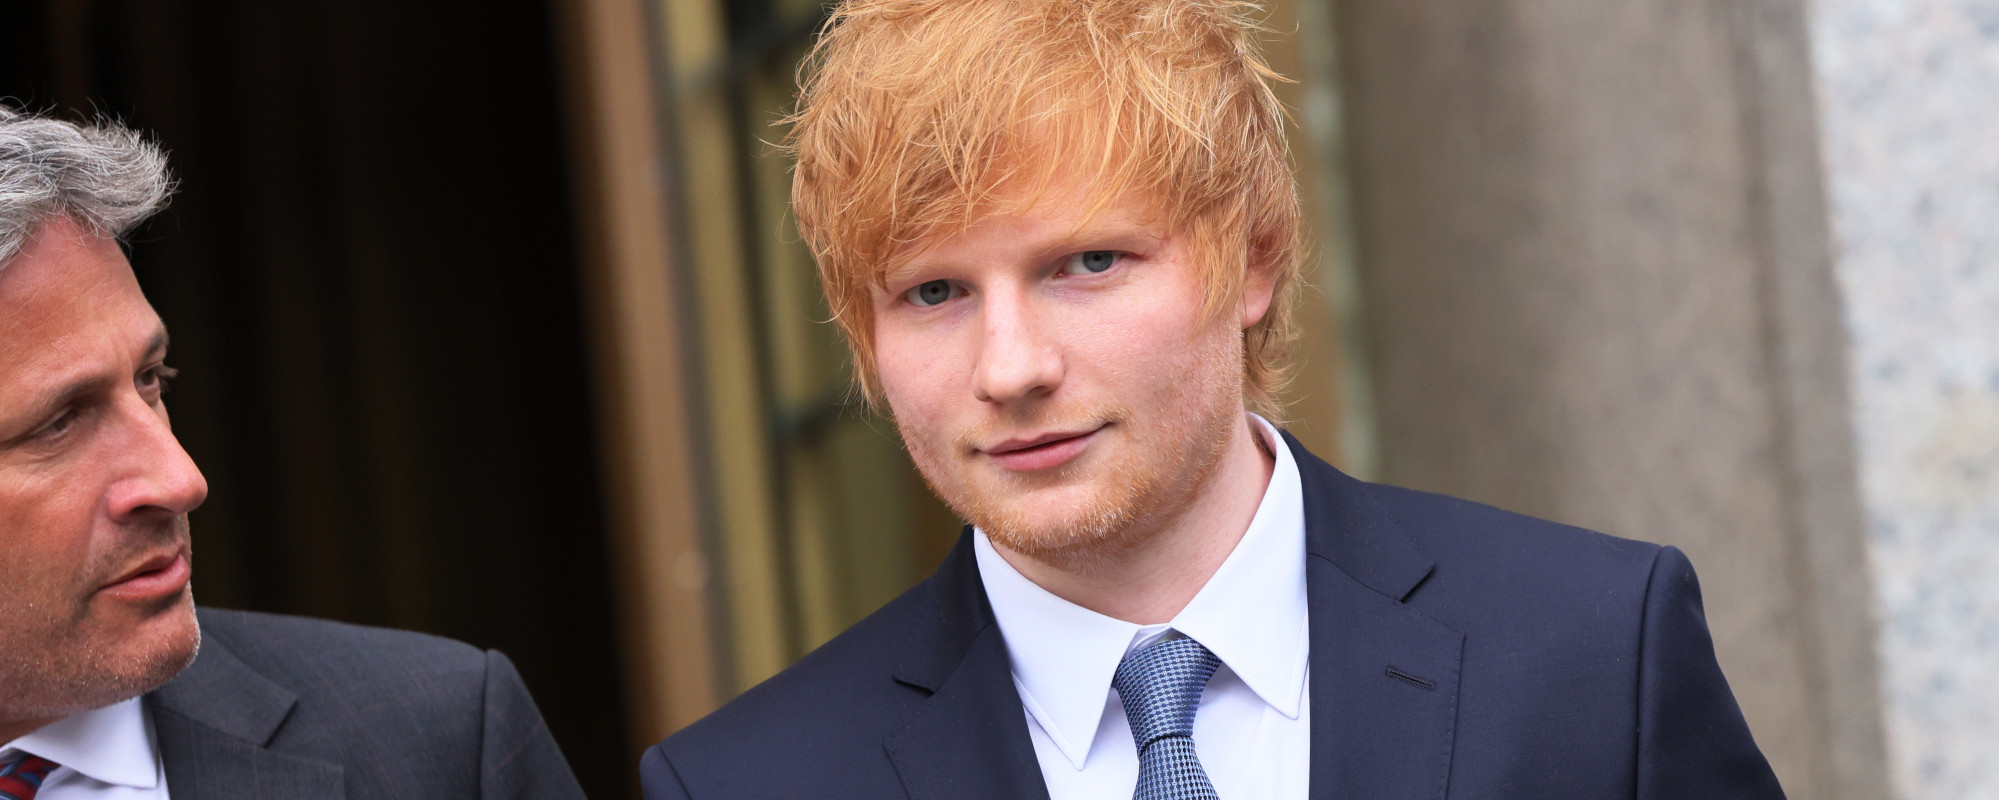 Ed Sheeran’s Parents in Awe Over Son’s “Extraordinary” Gift While in Paris